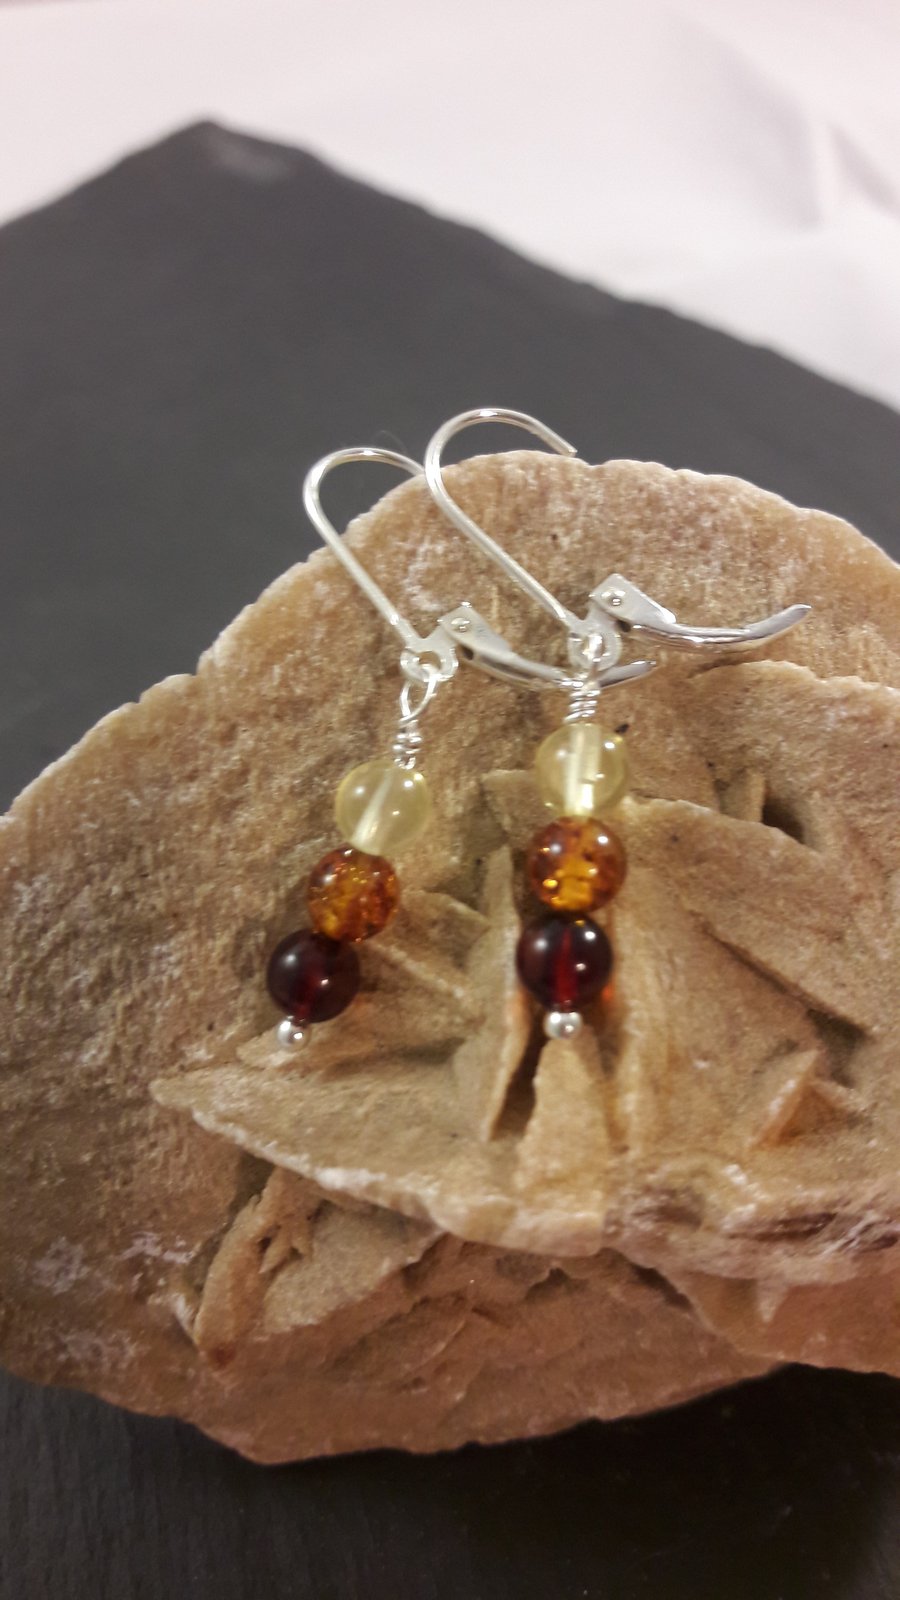 Tricolour Baltic Amber and Sterling Silver Short Earrings